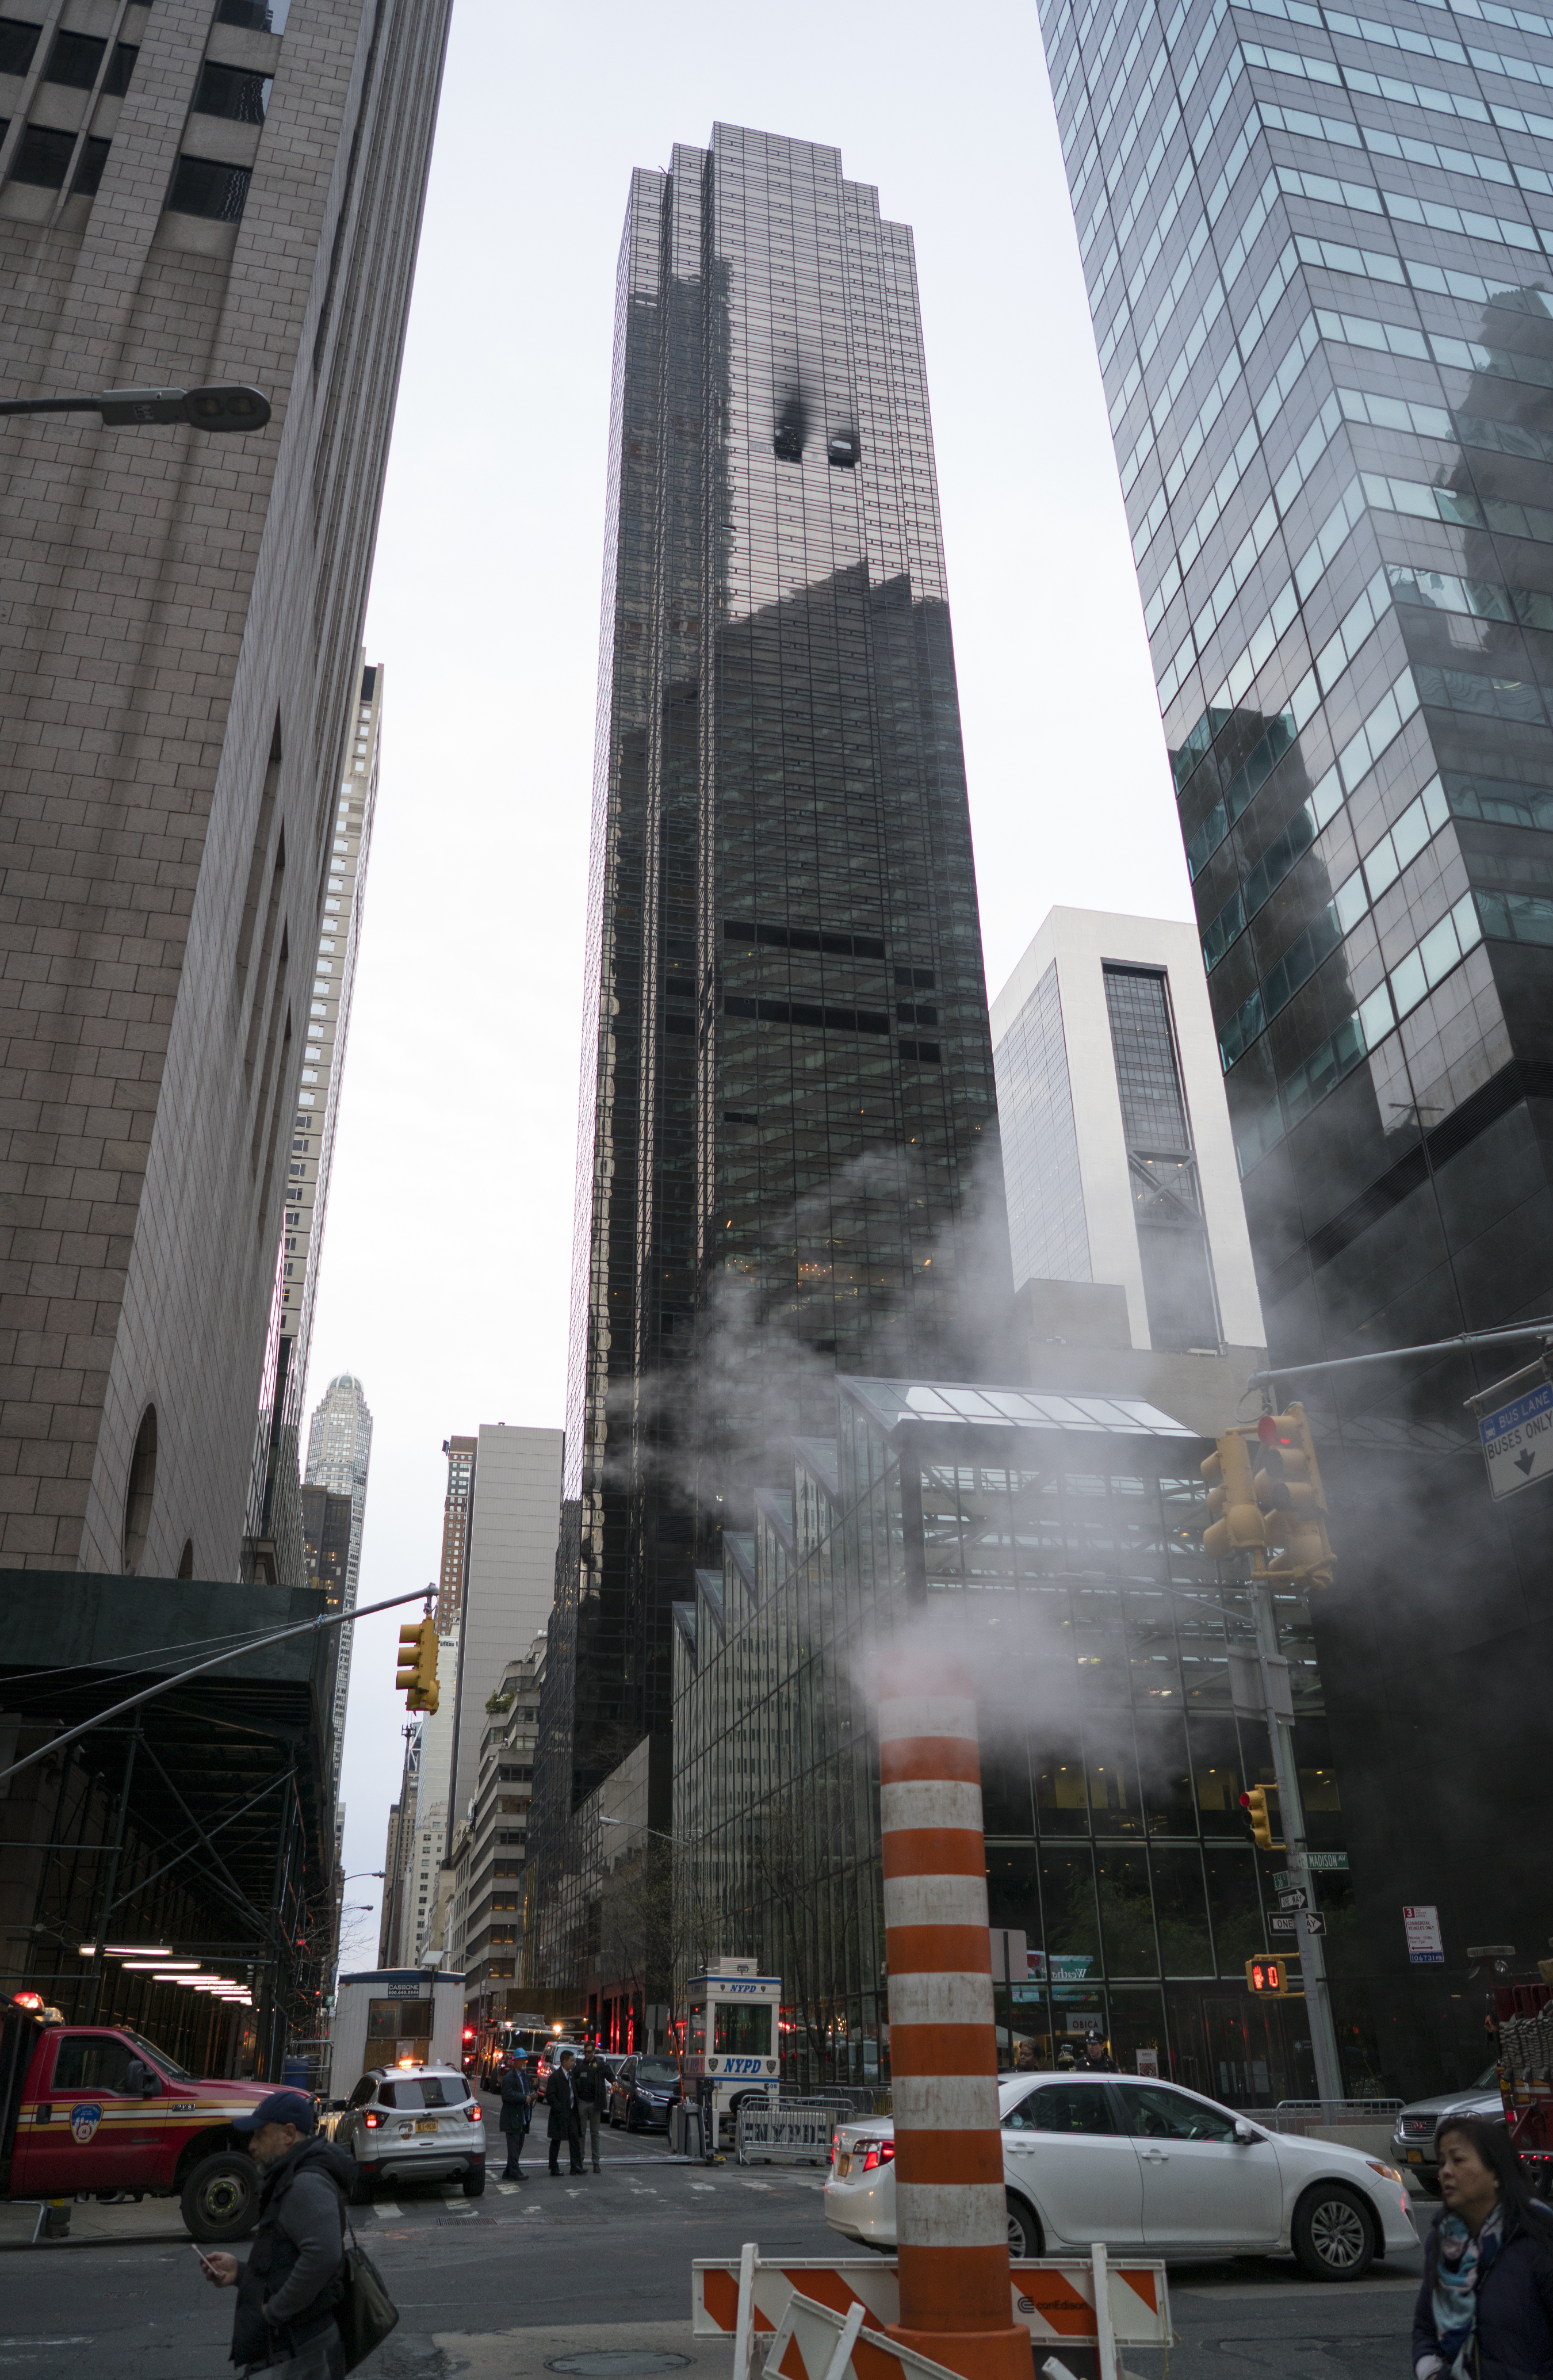 New York - 1 Killed In Fire At Trump Tower In New York2700 x 4137